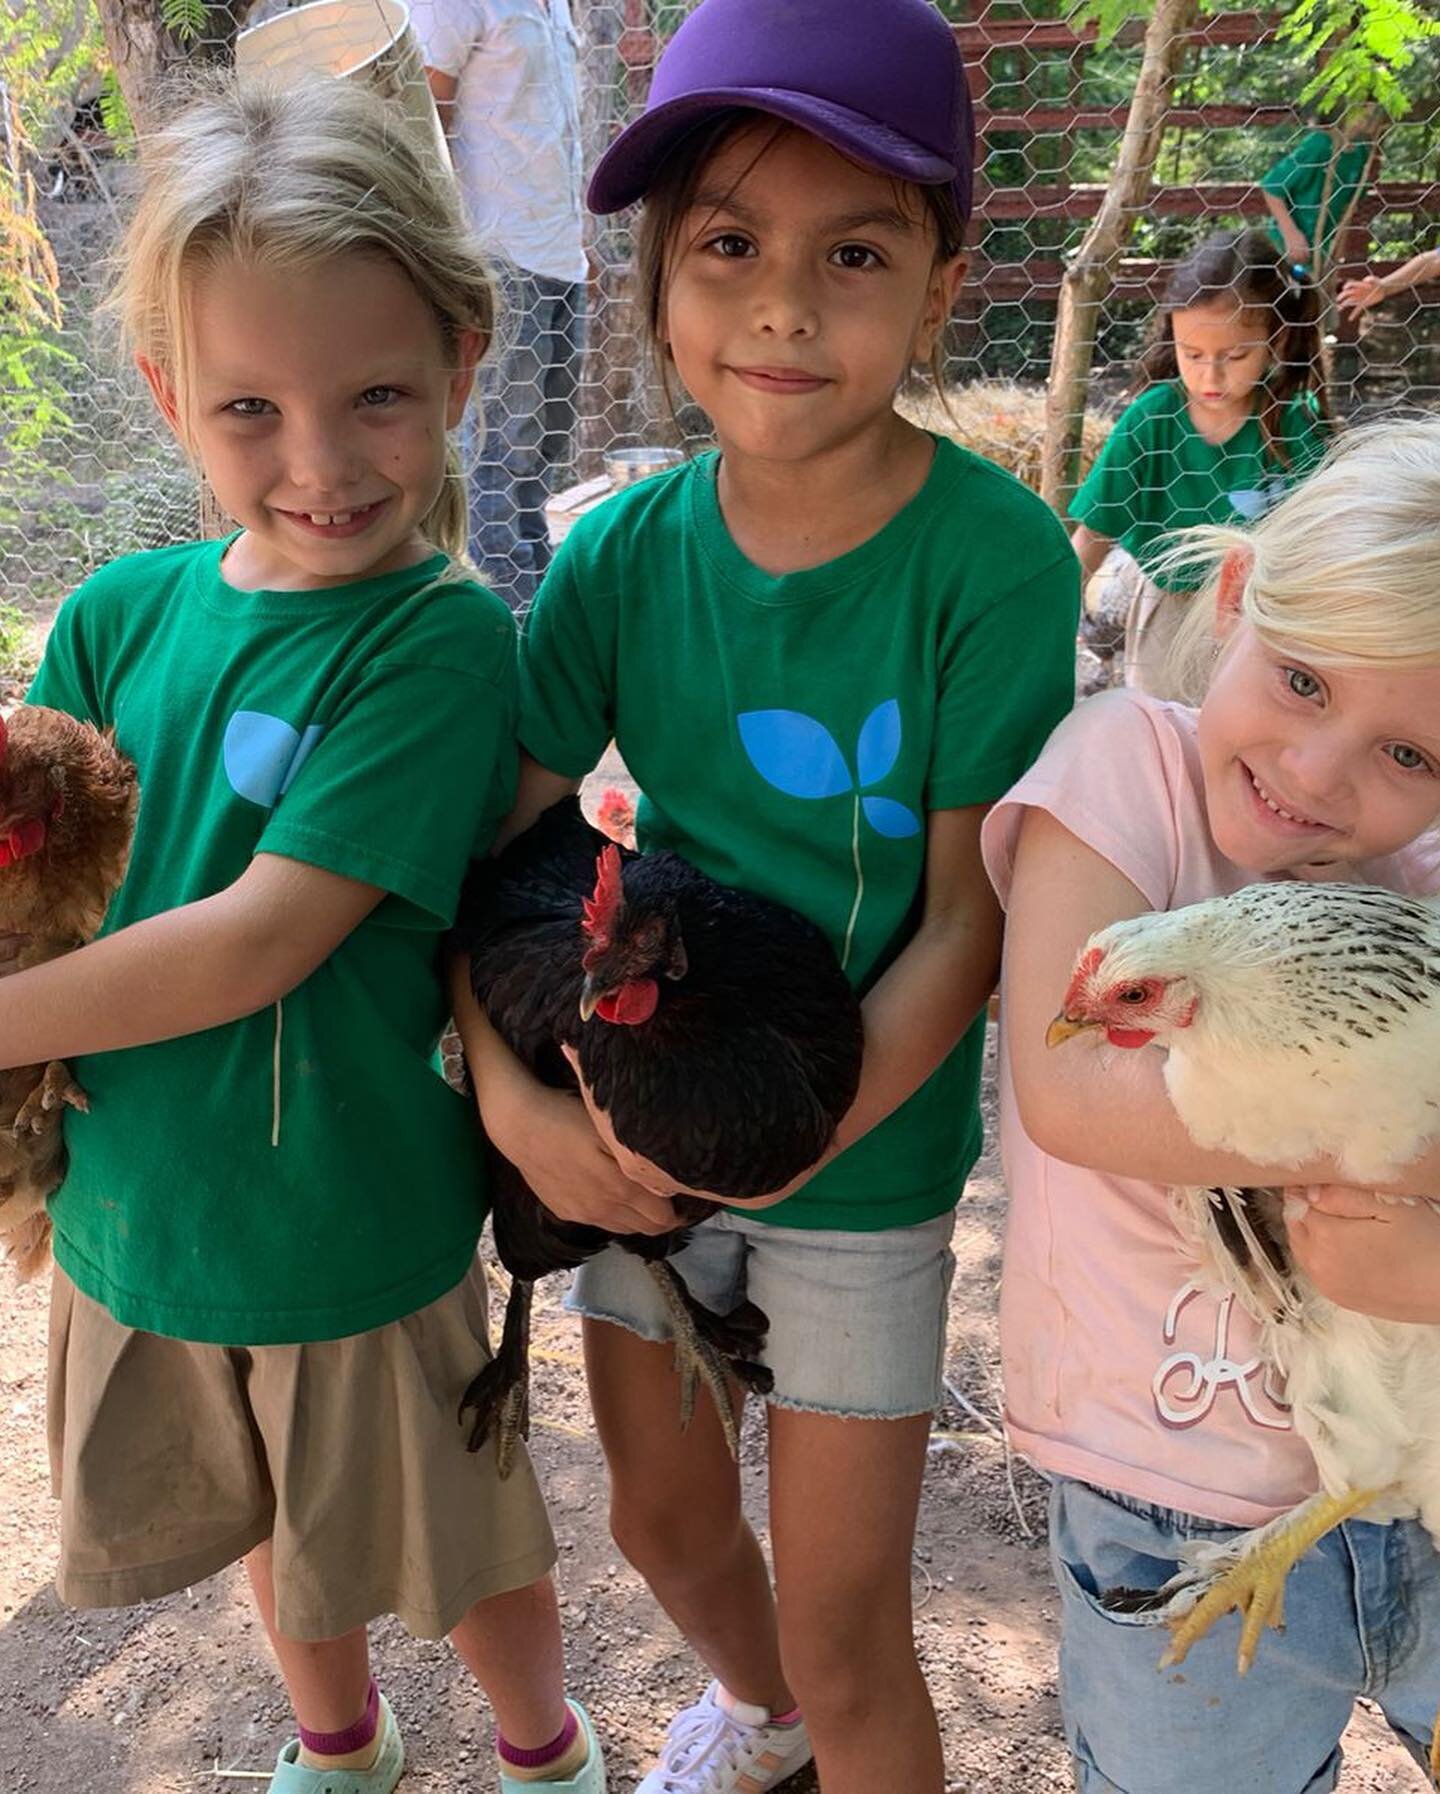 1st and 2nd grades took trips this week to Iyari Play @iyariplay in Lo De Marcos. They learned about and planted morninga, the &ldquo;miracle tree,&rdquo; baked in the mud kitchen, painted with natural paints, climbed and played, and oh yeah, chicken